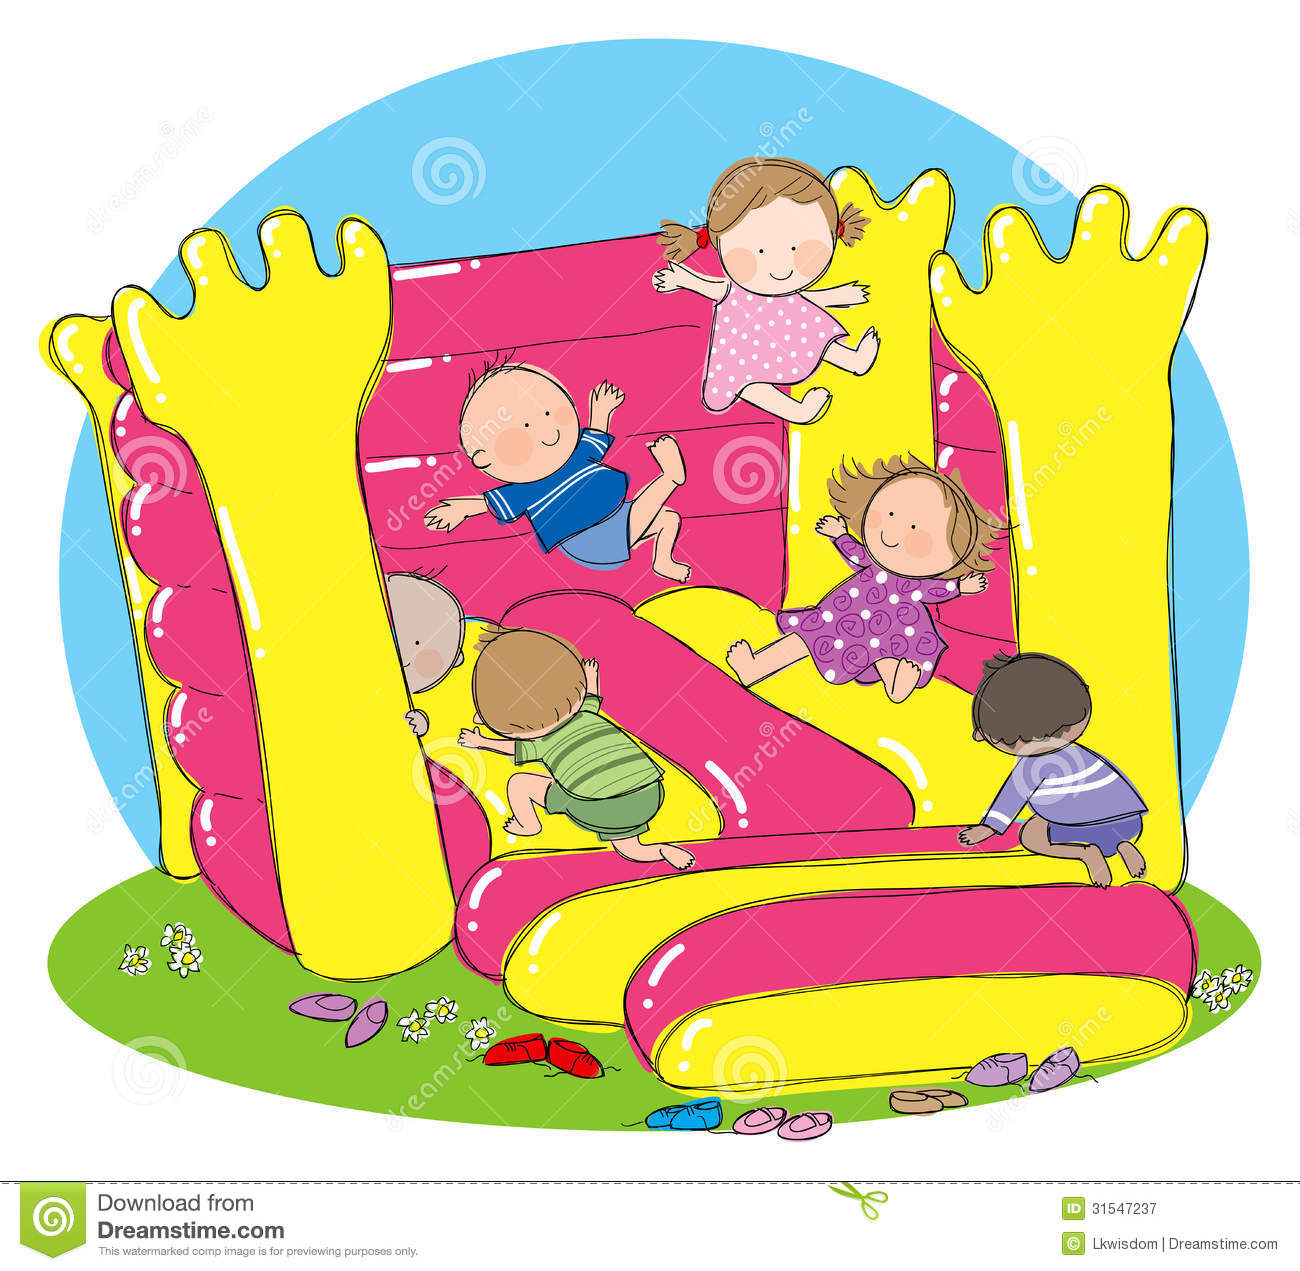 Bouncy Castle Party Royalty Free Stock Photography   Image  31547237